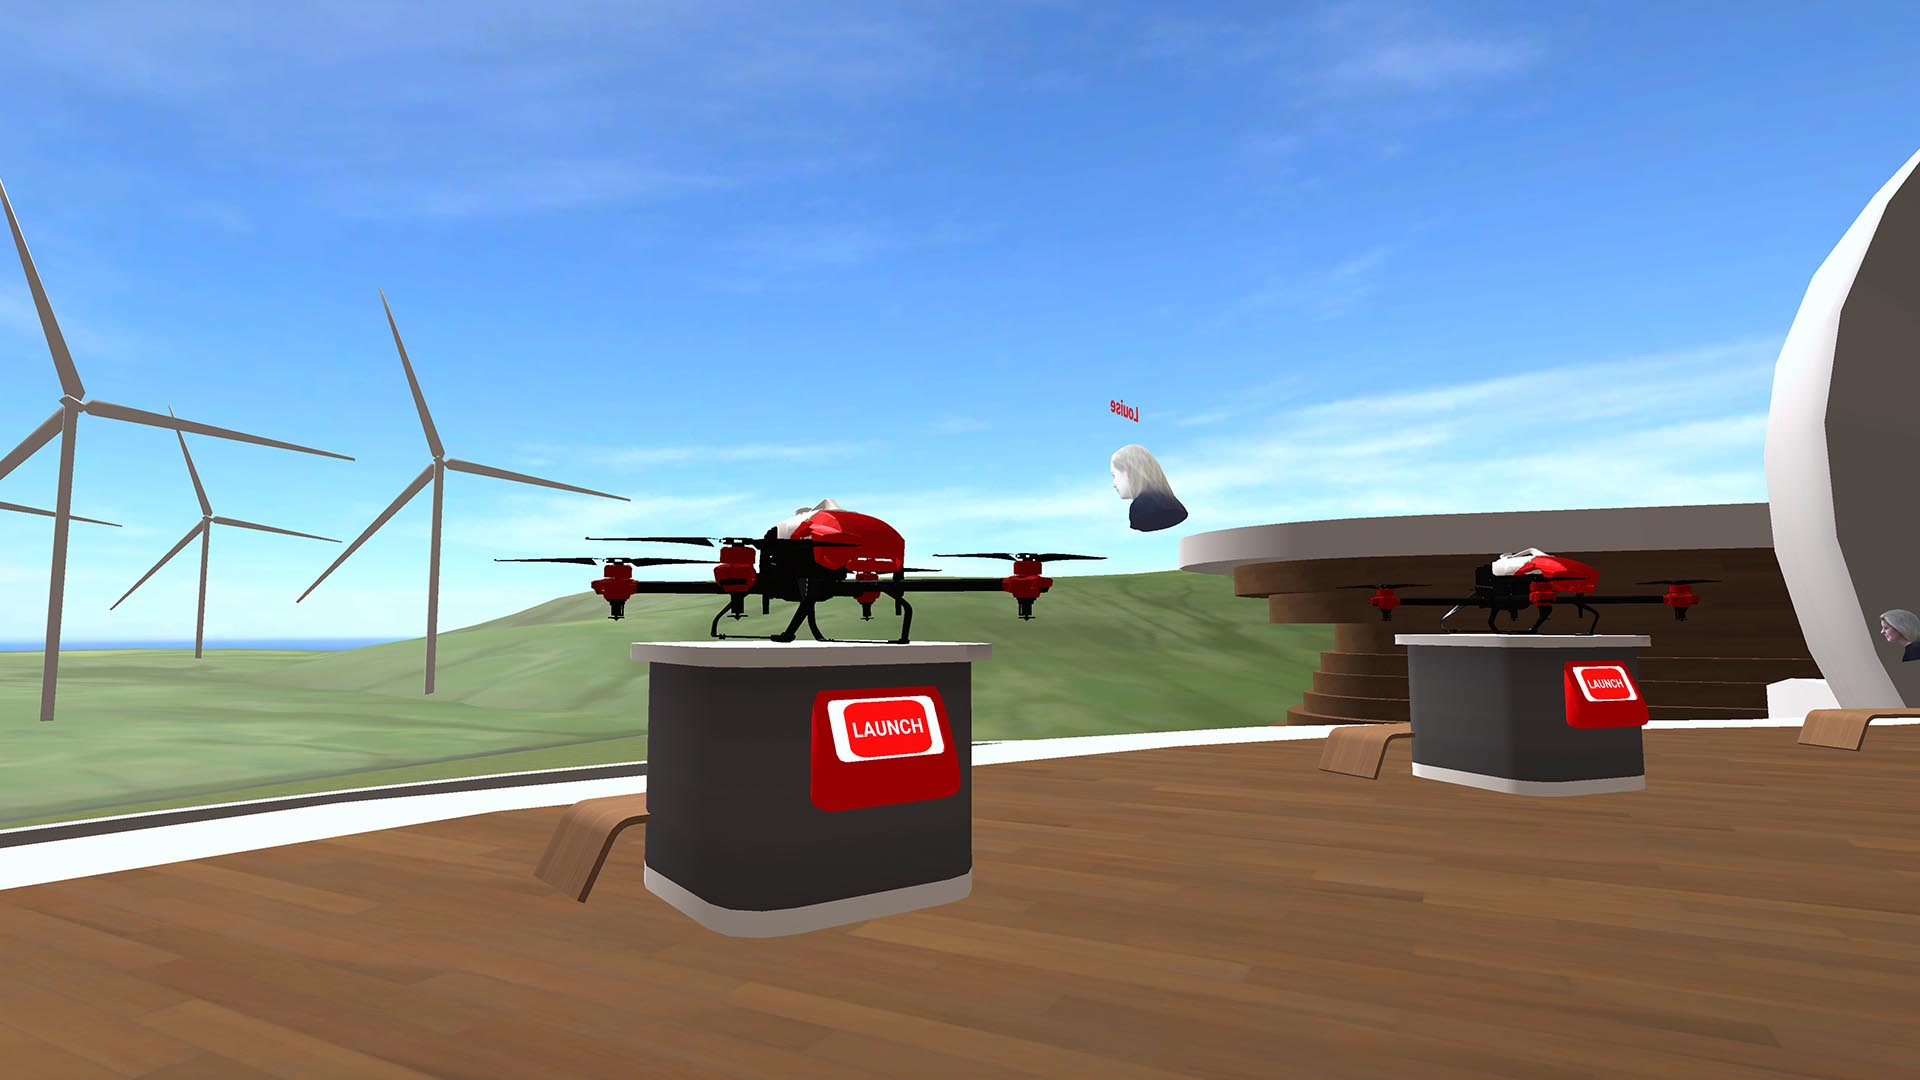 XAG drone flying experience in AAC VR Virtual Campus Environment for STEMCONNECT2020